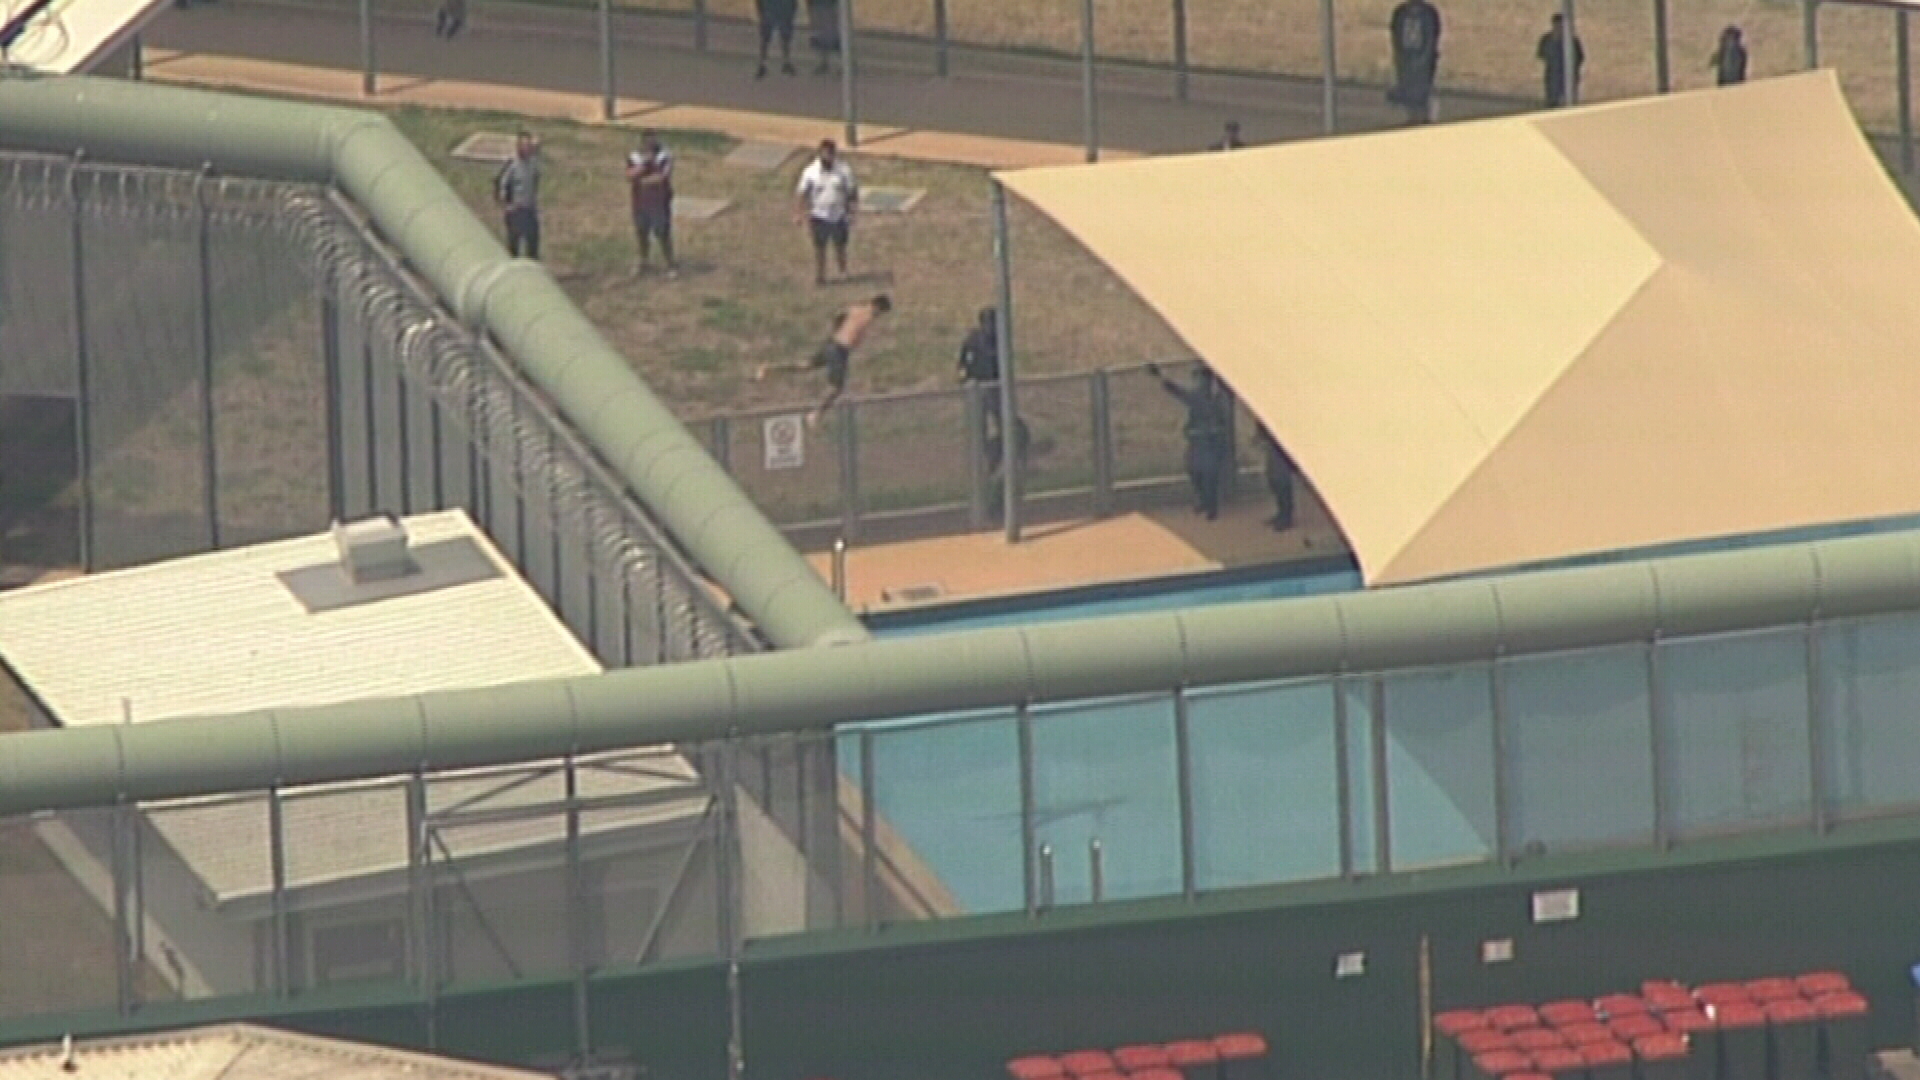 One of the inmates jumped from the roof into a swimming pool.